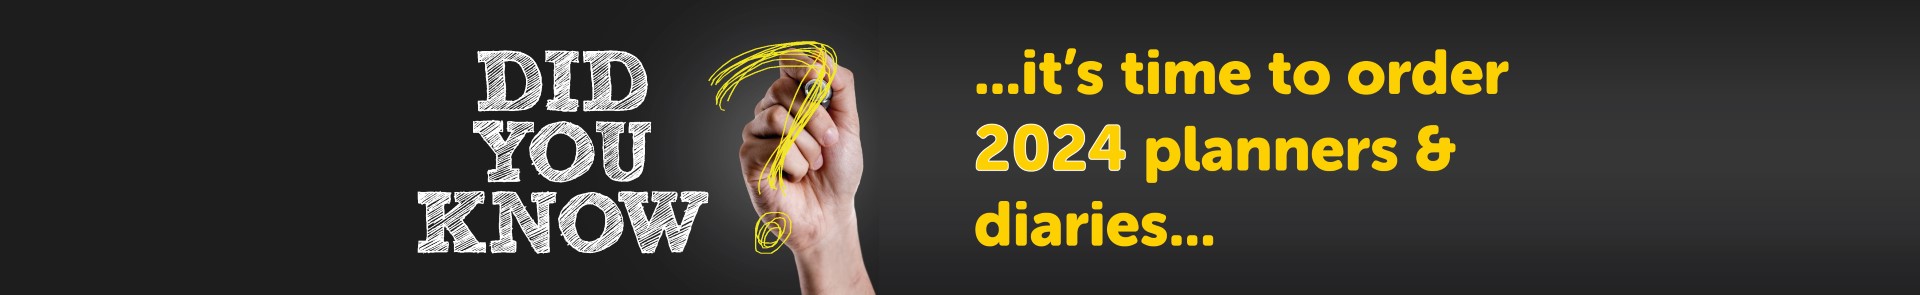 Time to purchase your 2024 Business Diaries!